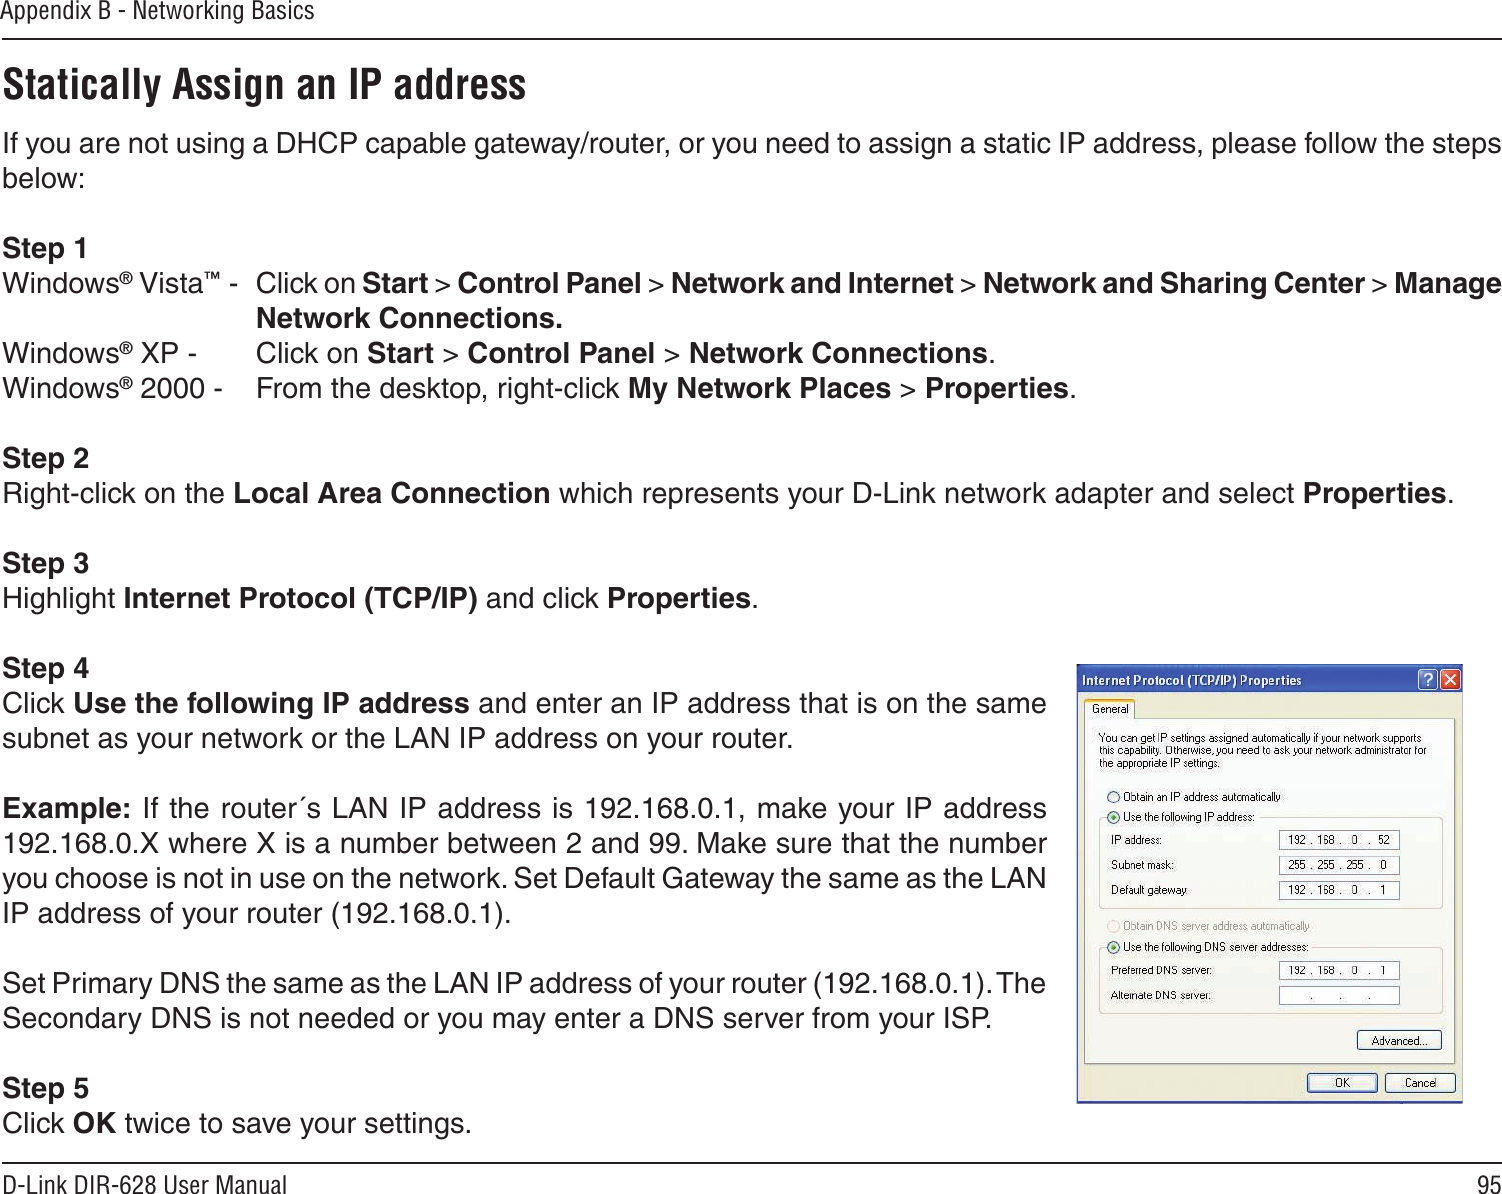 95D-Link DIR-628 User ManualAppendix B - Networking BasicsStatically Assign an IP addressIf you are not using a DHCP capable gateway/router, or you need to assign a static IP address, please follow the steps below:Step 1Windows® Vista™ -  Click on Start &gt; Control Panel &gt; Network and Internet &gt; Network and Sharing Center &gt; Manage Network Connections.Windows® XP -  Click on Start &gt; Control Panel &gt; Network Connections.Windows® 2000 -  From the desktop, right-click My Network Places &gt; Properties.Step 2Right-click on the Local Area Connection which represents your D-Link network adapter and select Properties.Step 3Highlight Internet Protocol (TCP/IP) and click Properties.Step 4Click Use the following IP address and enter an IP address that is on the same subnet as your network or the LAN IP address on your router. Example: If the router´s LAN IP address is 192.168.0.1, make your IP address 192.168.0.X where X is a number between 2 and 99. Make sure that the number you choose is not in use on the network. Set Default Gateway the same as the LAN IP address of your router (192.168.0.1). Set Primary DNS the same as the LAN IP address of your router (192.168.0.1). The Secondary DNS is not needed or you may enter a DNS server from your ISP.Step 5Click OK twice to save your settings.